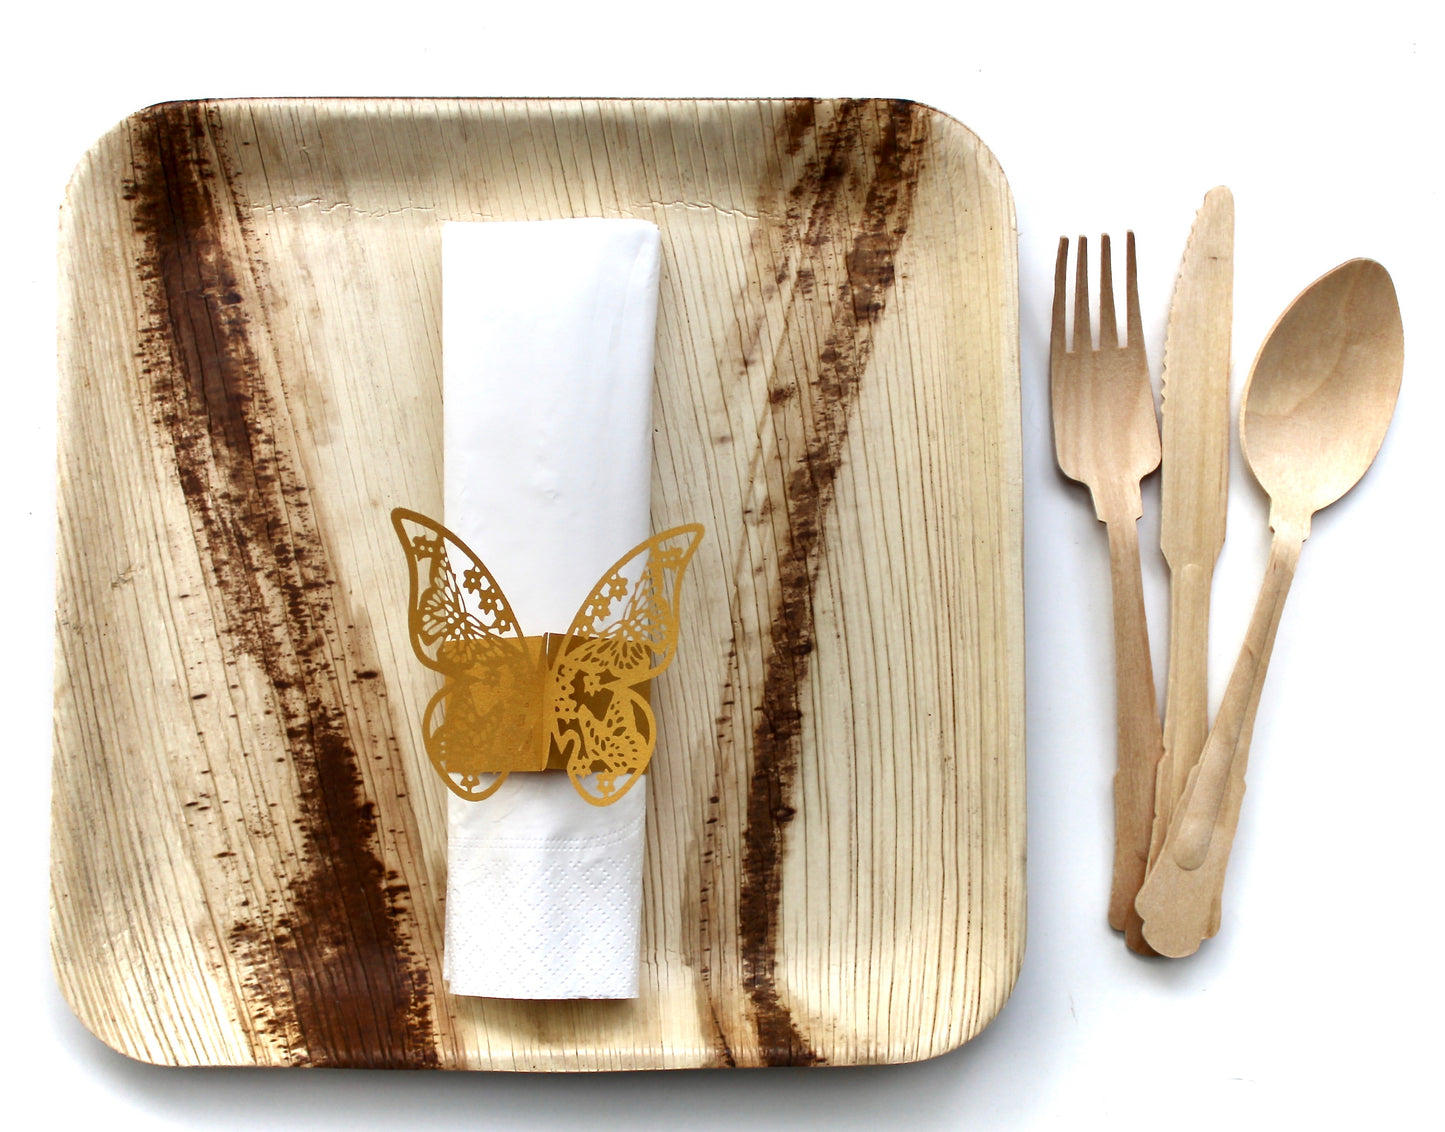 Palm Leaf plates 10 Pice 9.5" Square- 30 Pic cutlery  and 10 pice Napkin and 10 Pice butterfly 3D